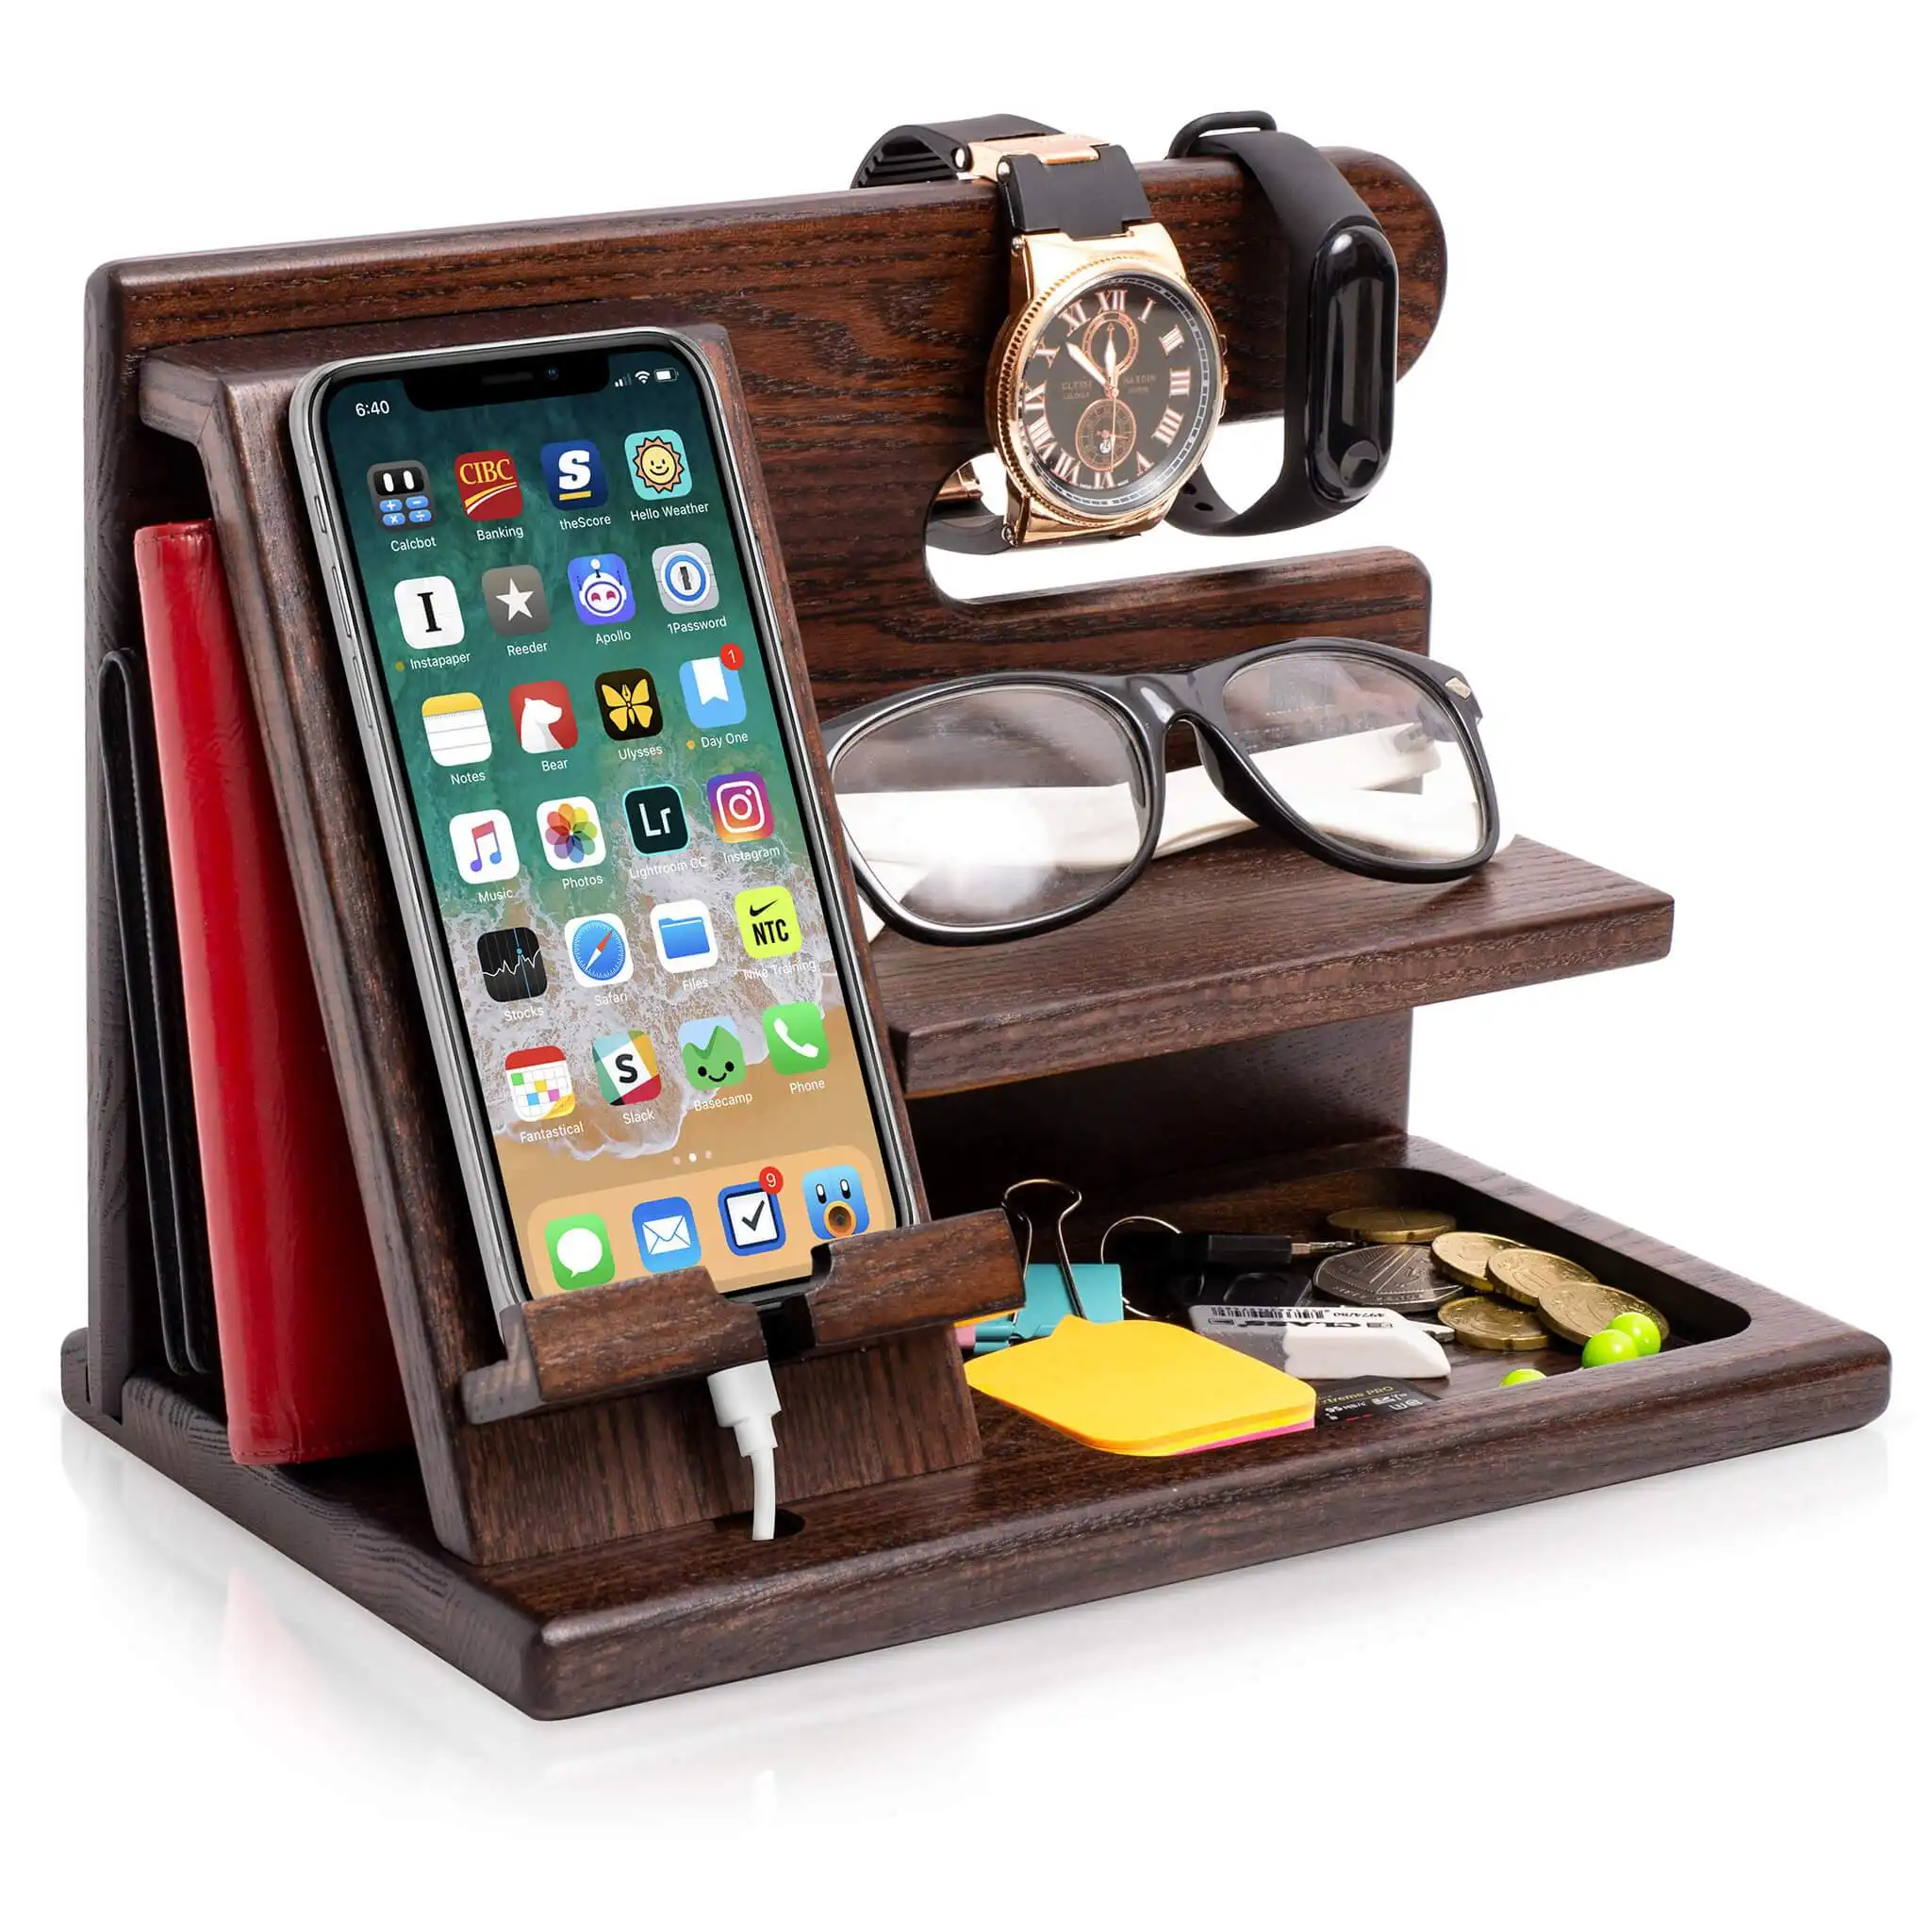 In Stock Multifunctional Wooden Desk Organizer with Docking Stand Wood Phone Docking Station Key Holder Stand Watch Organizer